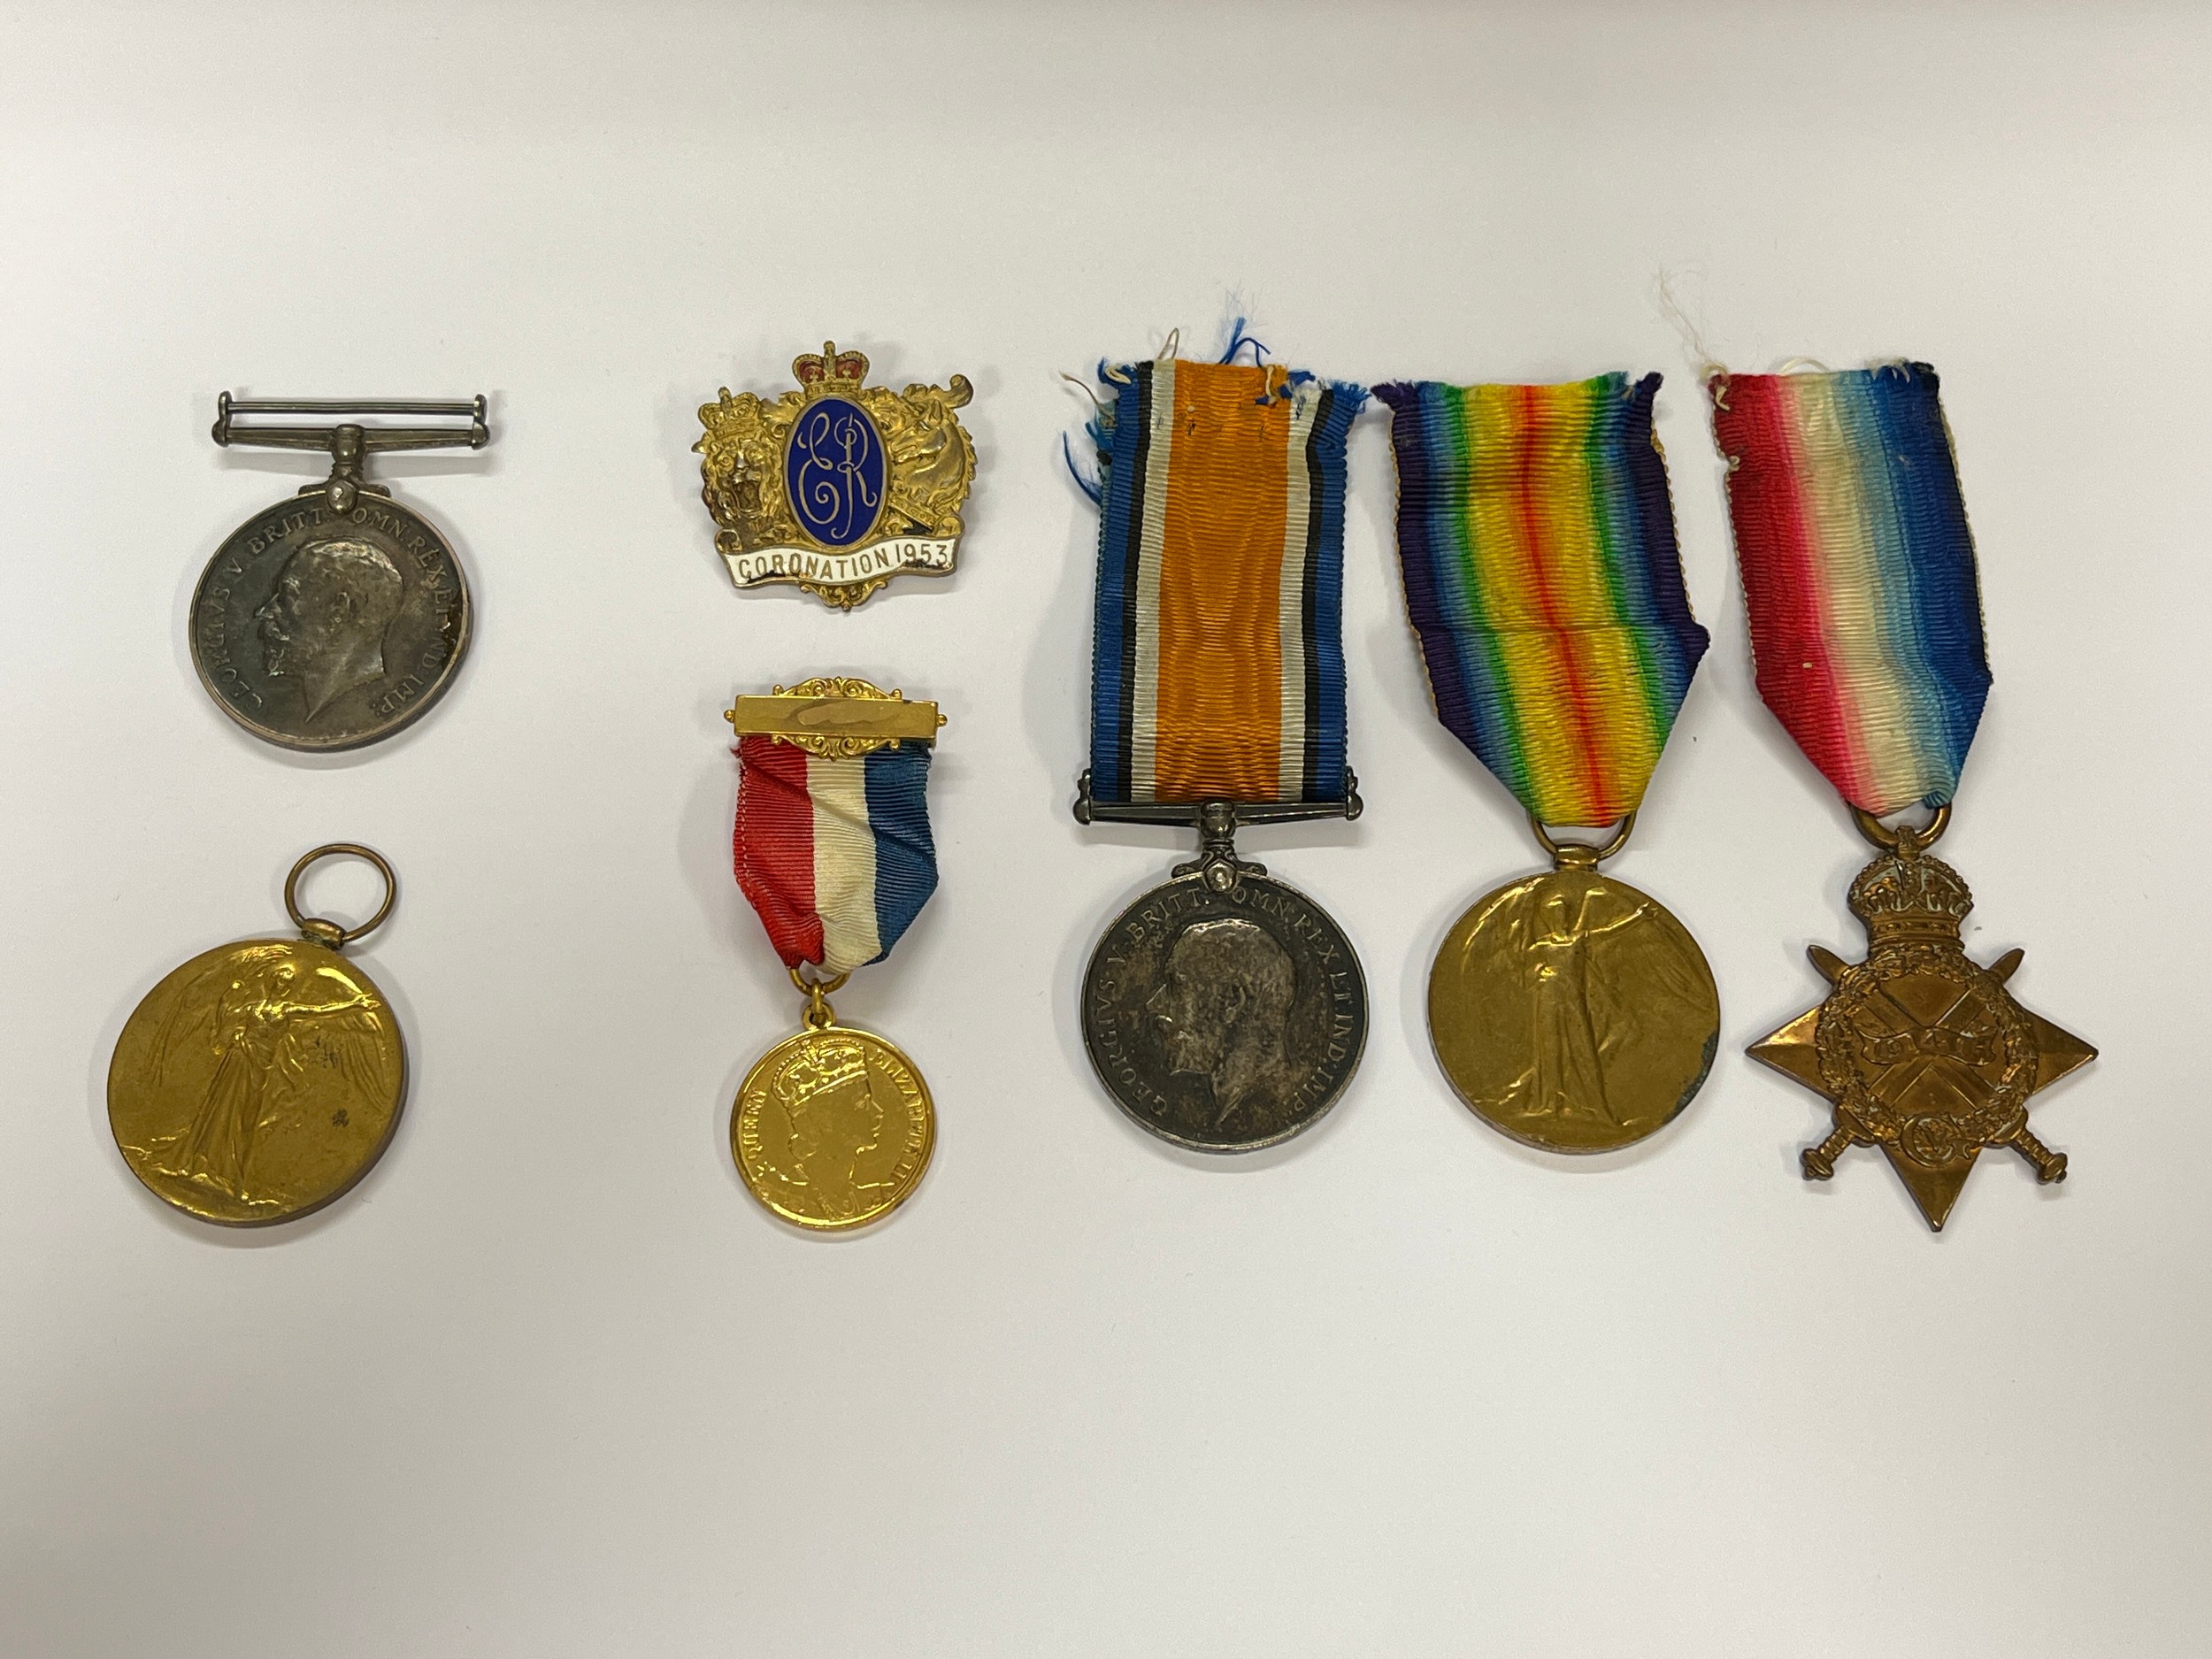 A WWI 1915 medal trio named to 14848 PTE. R.G. DICKINSON BORD. R. (named as DICKENSON on 1915 star),